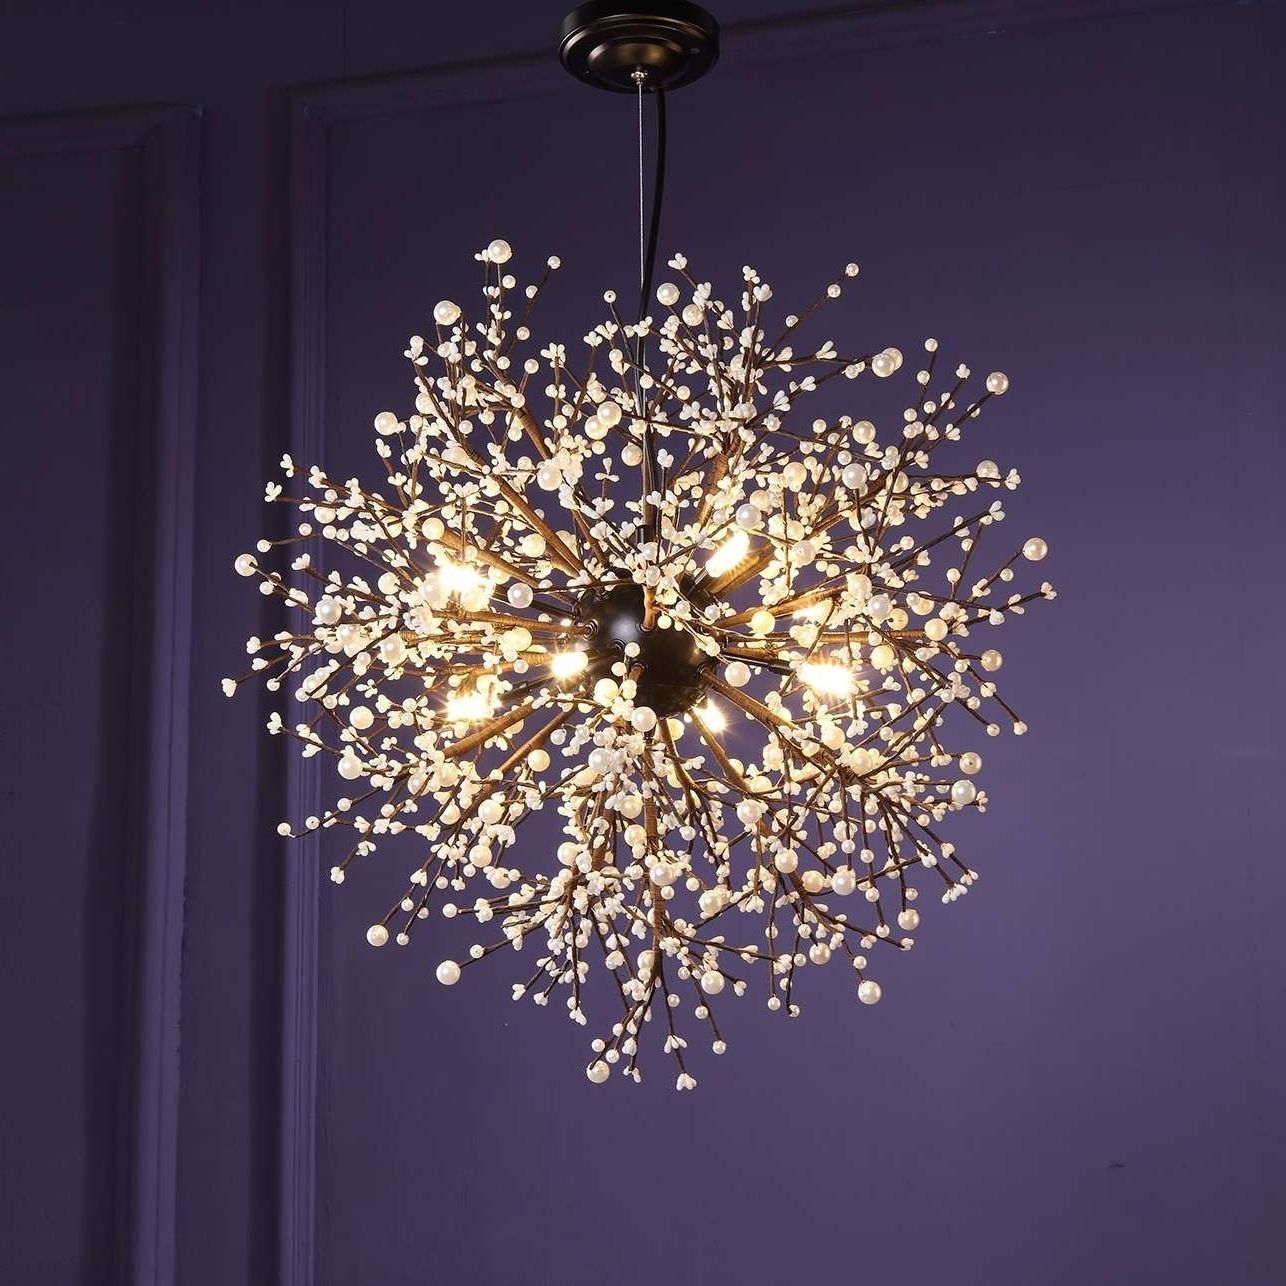 Chandeliers Design : Marvelous Amazing Glass Ball Chandelier Light Within Recent Turquoise Ball Chandeliers (View 7 of 20)